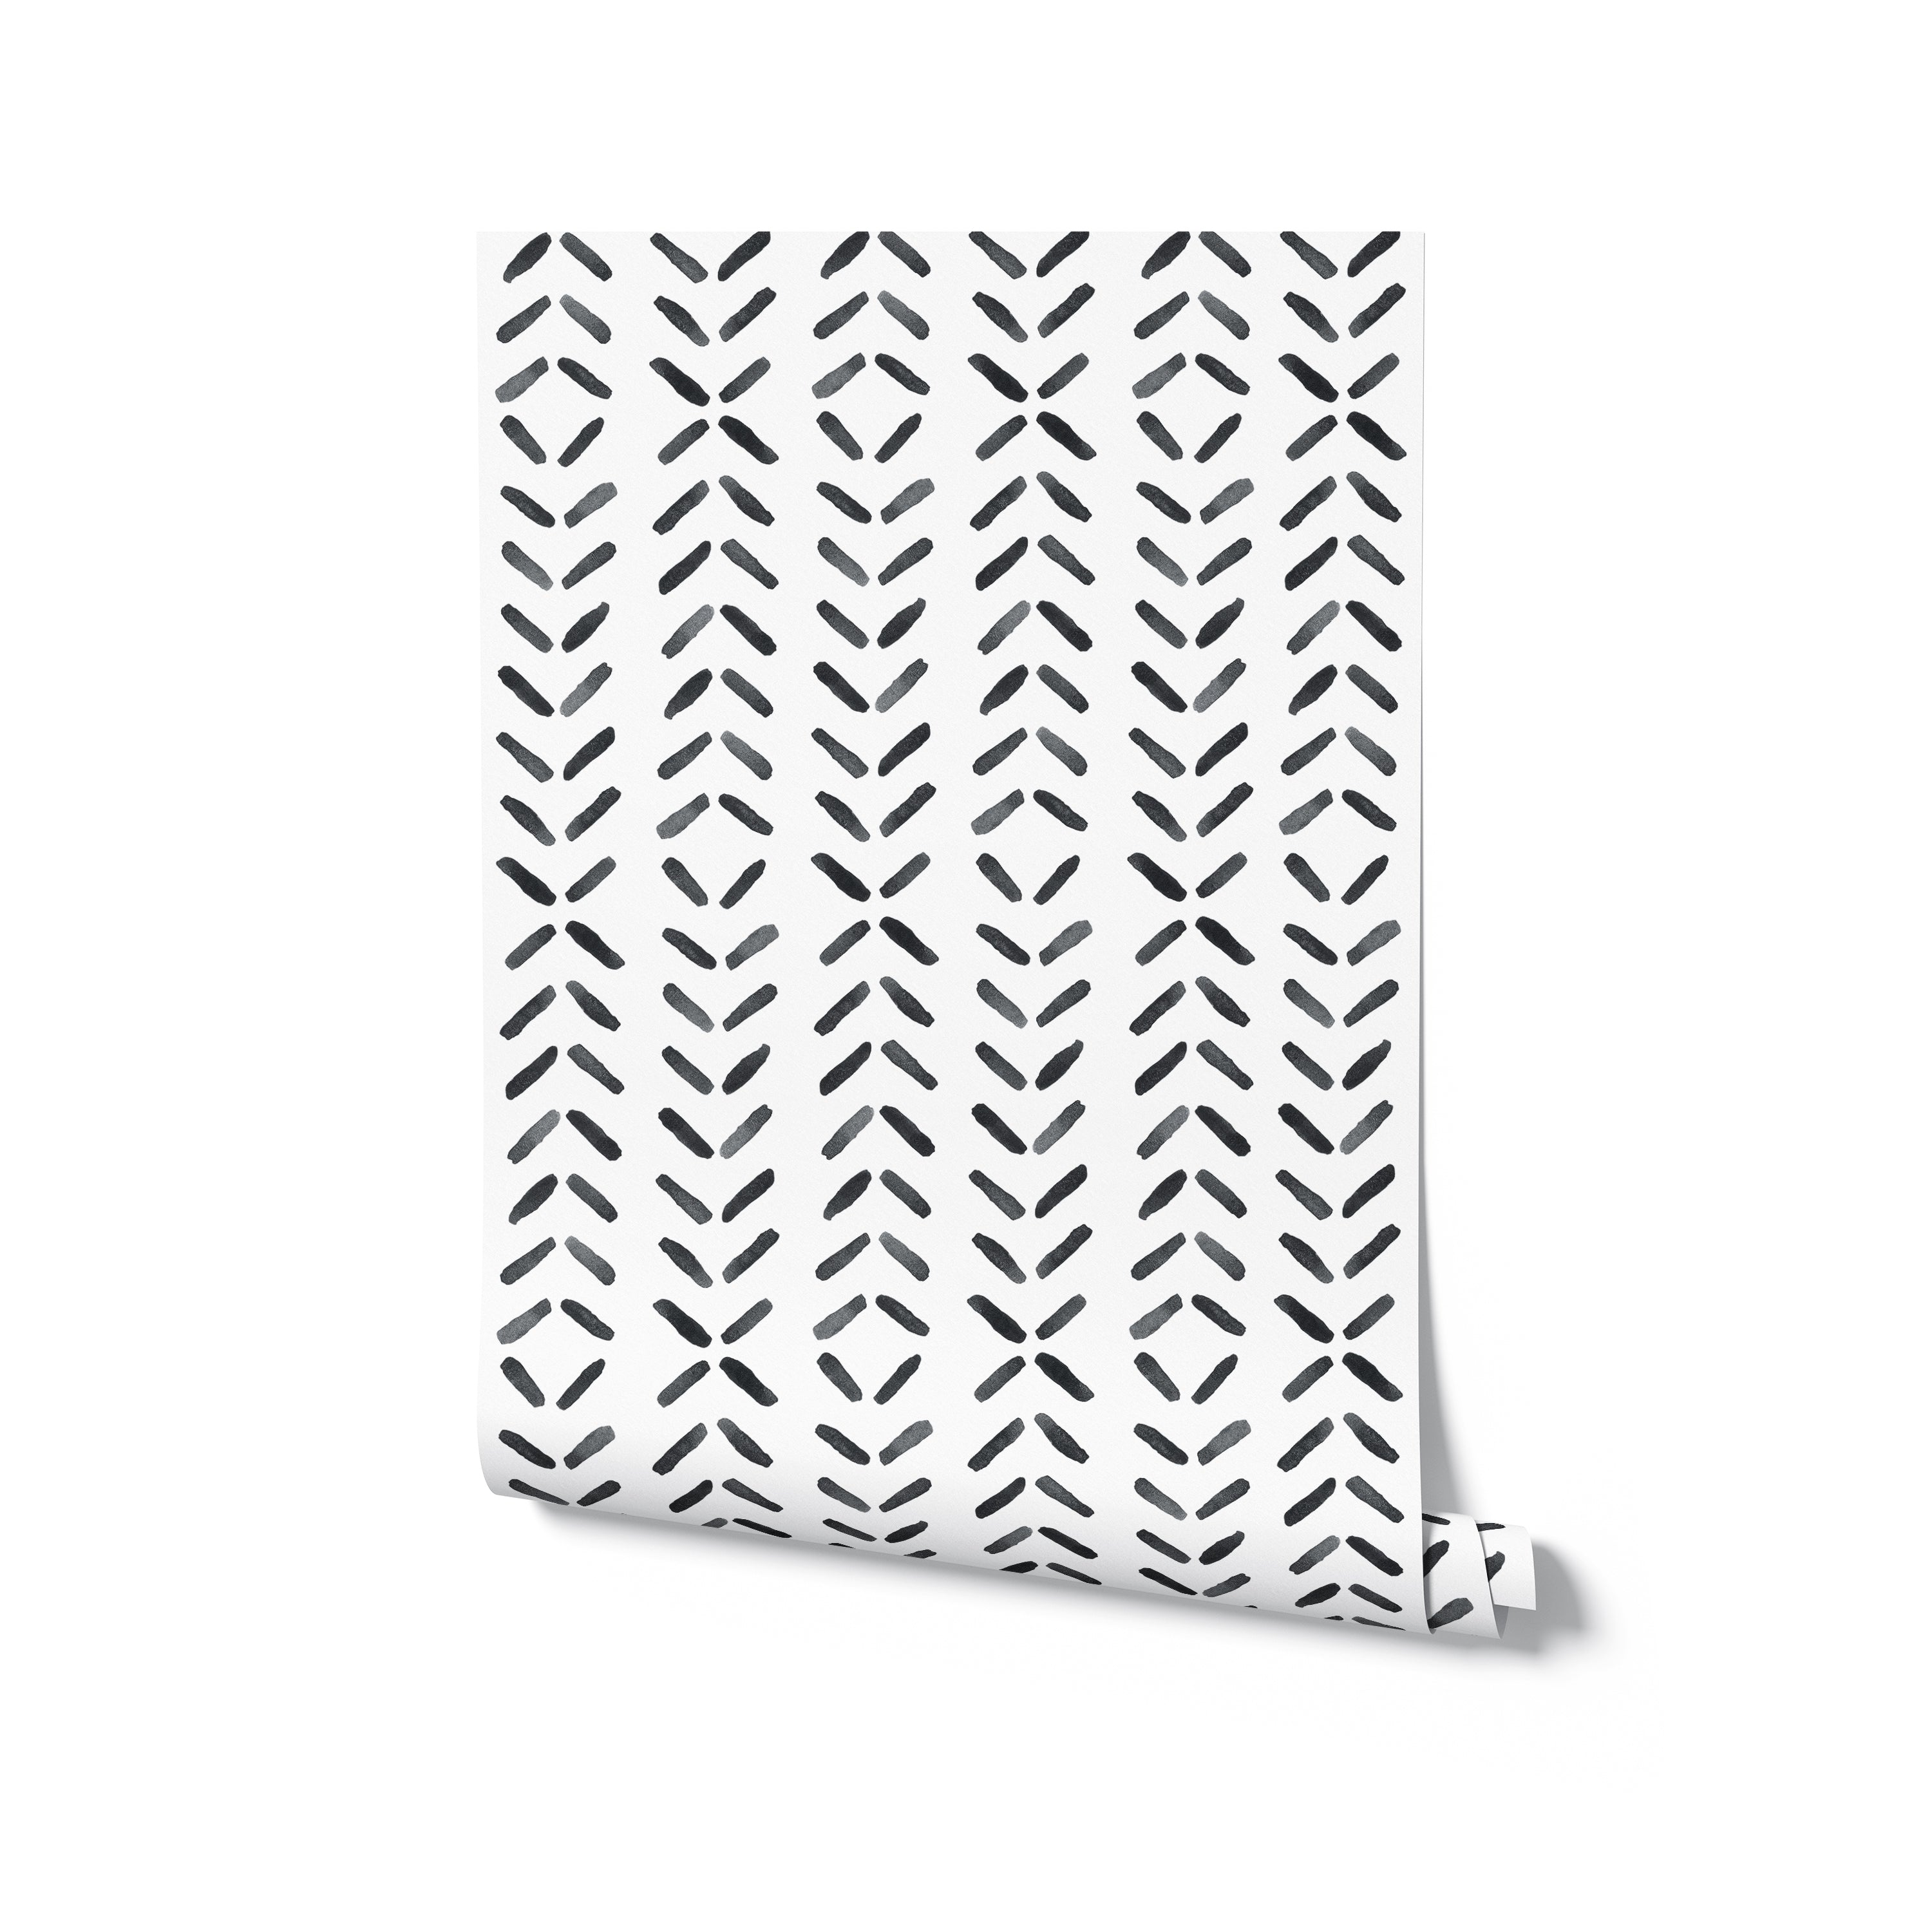 A roll of Boho Chevron Wallpaper, partially unrolled to show its distinctive chevron pattern in black on a light background. The wallpaper's dynamic and modern design makes it an ideal choice for creating an eye-catching feature wall in any room.